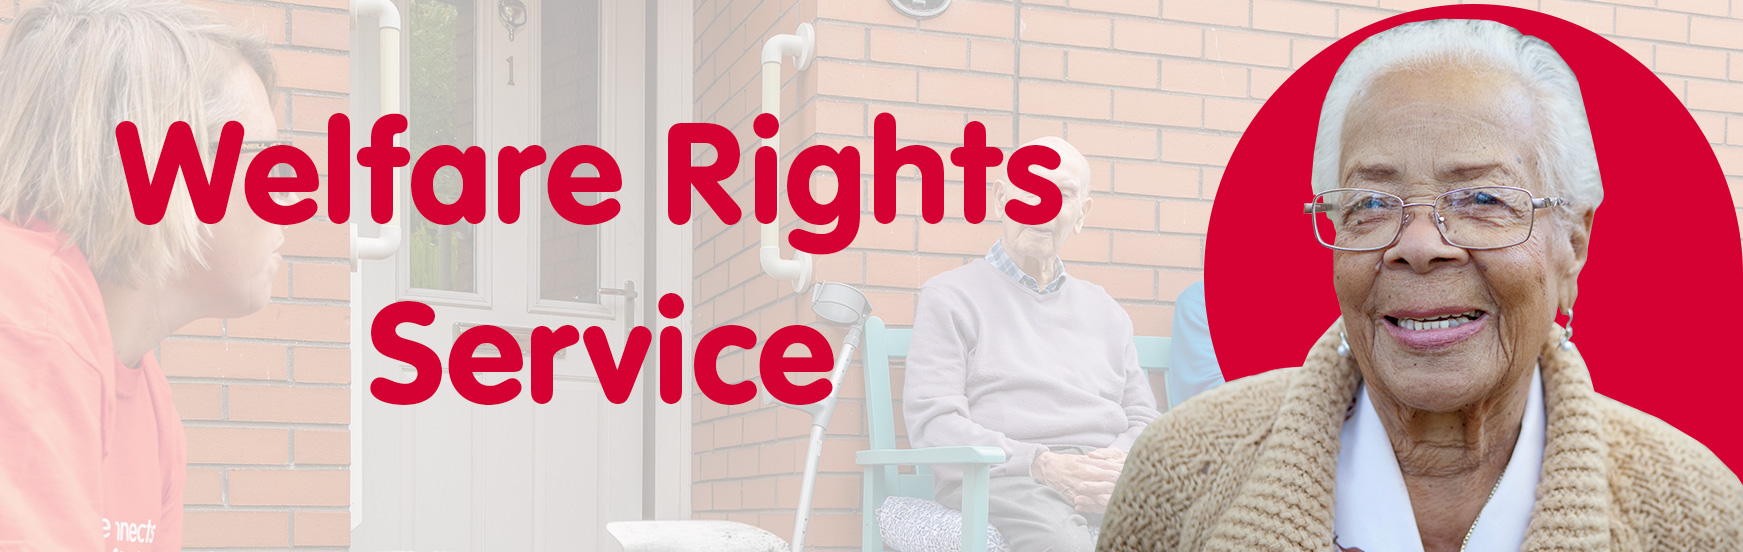 age connects welfare rights service